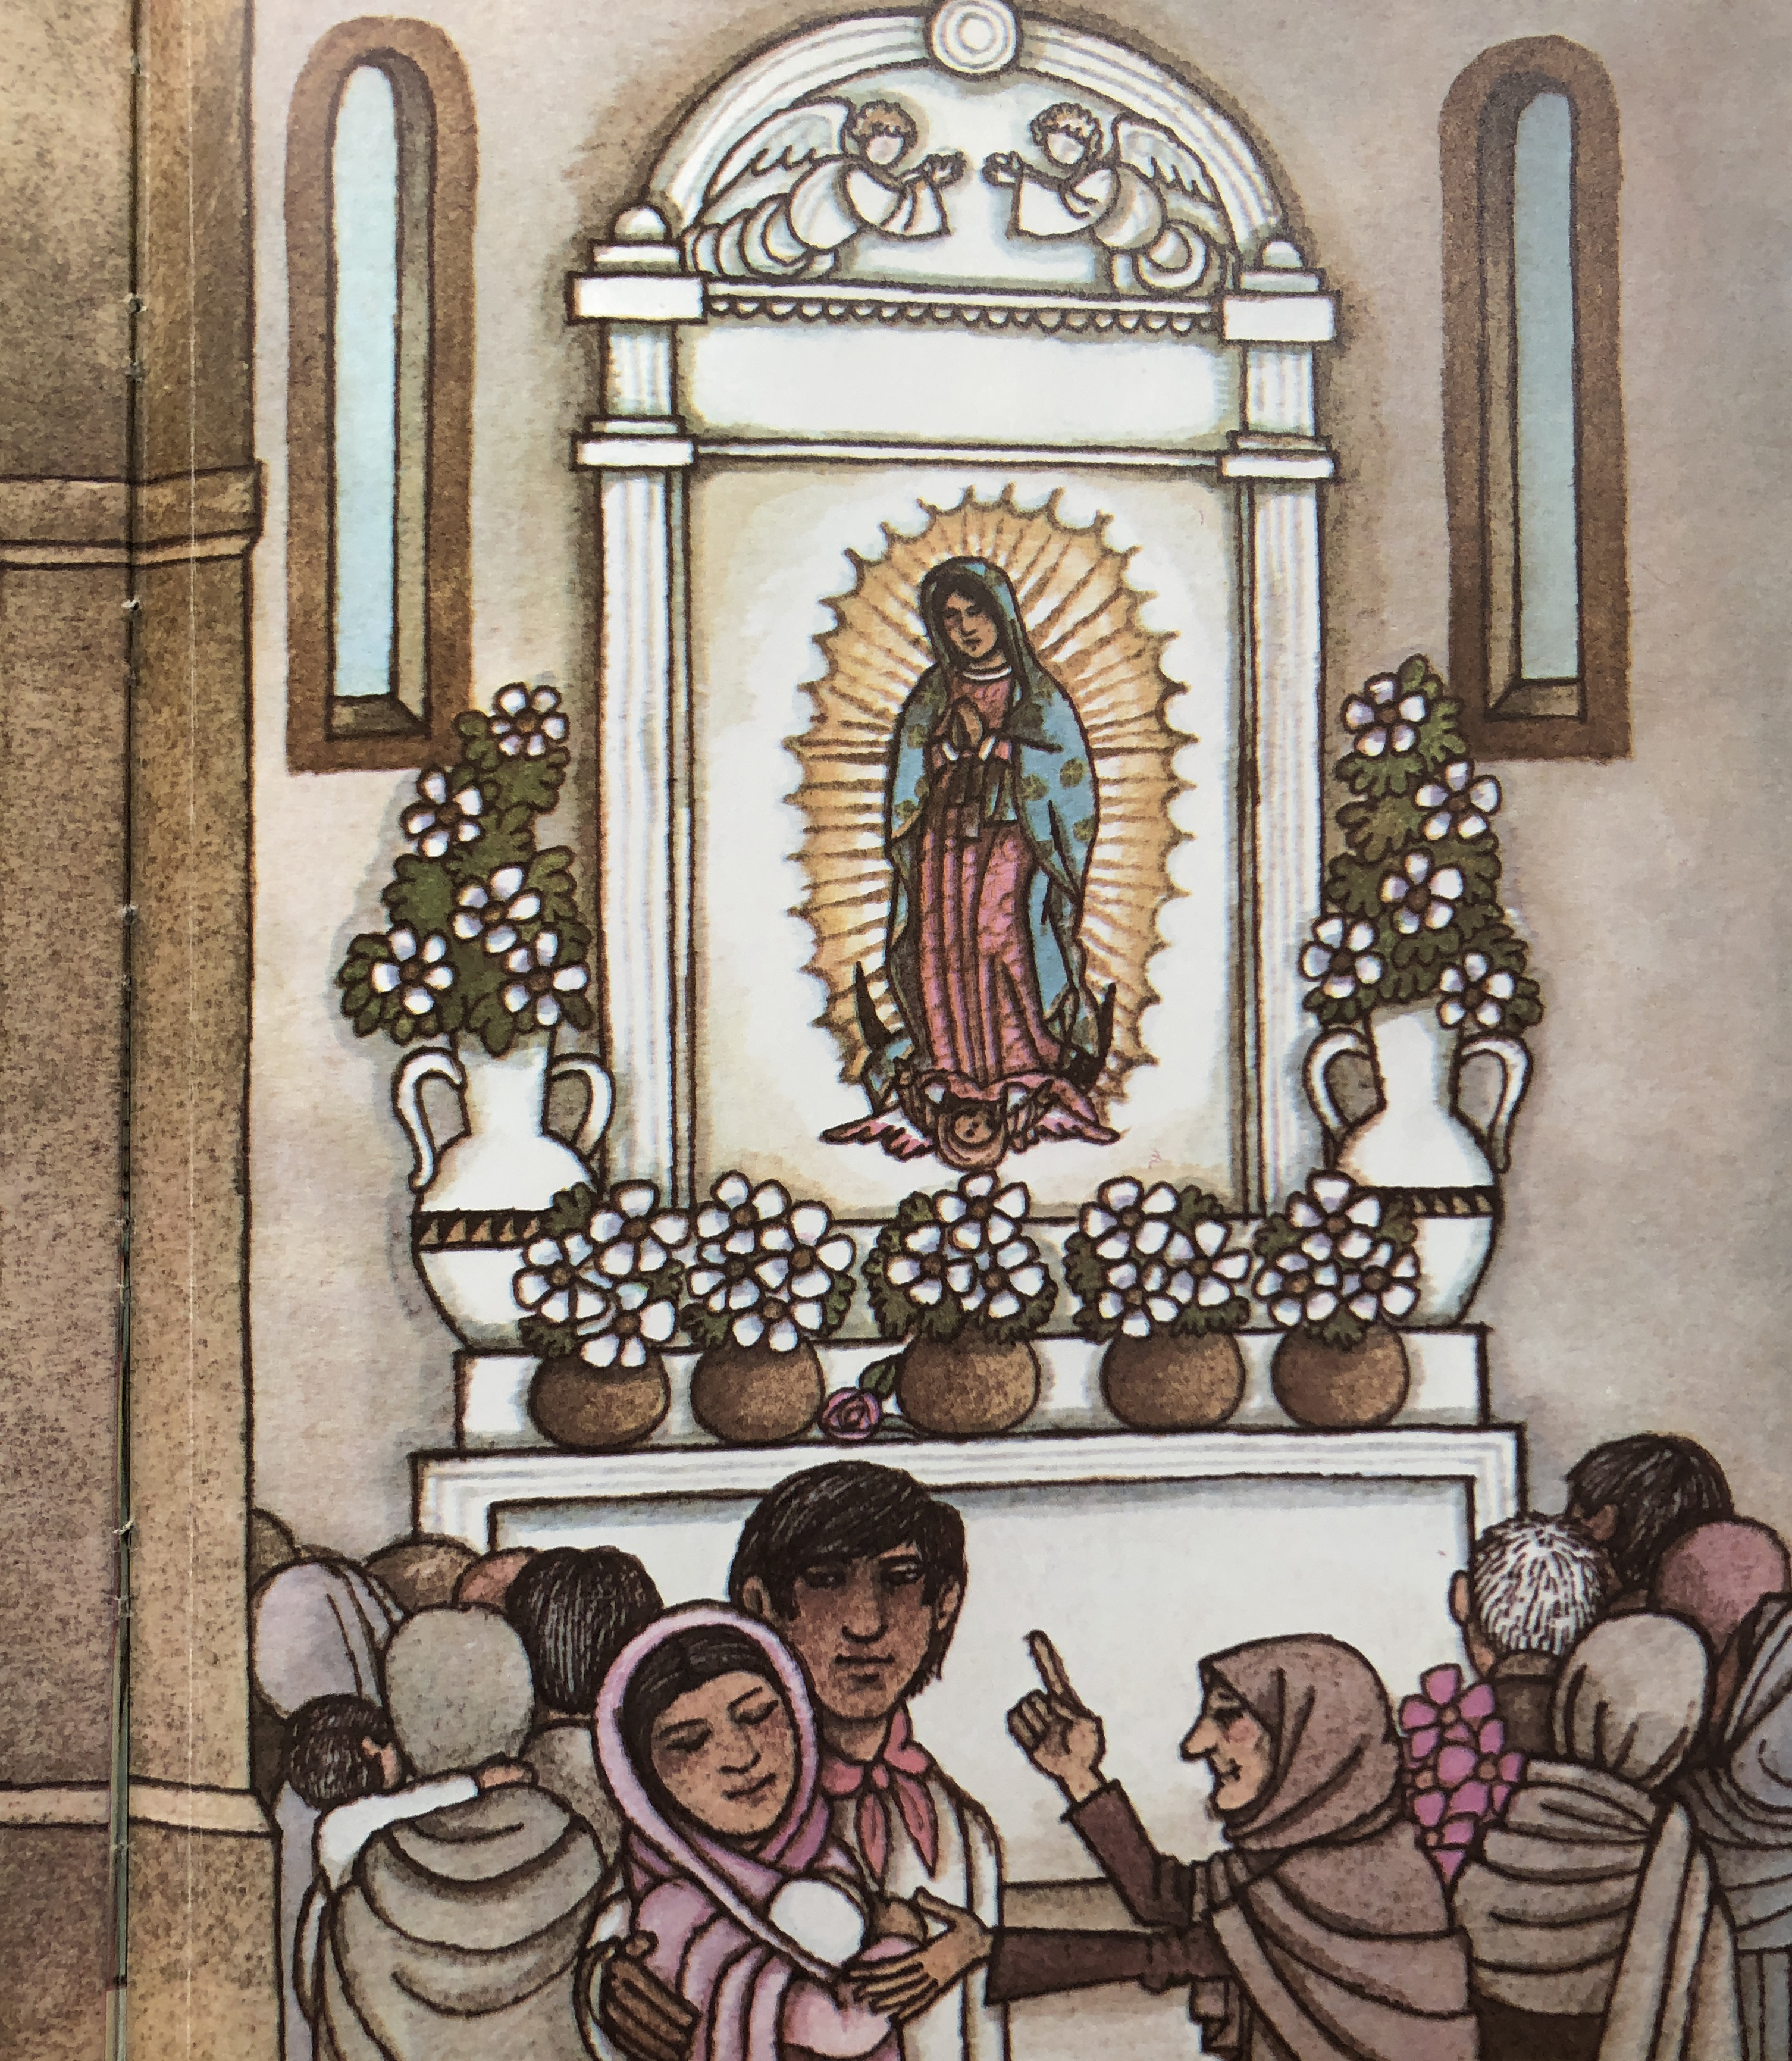 Inside page of book illustration of Our Lady of Guadalupe altar surrounded with flowers and a crowd of people at the base of the page